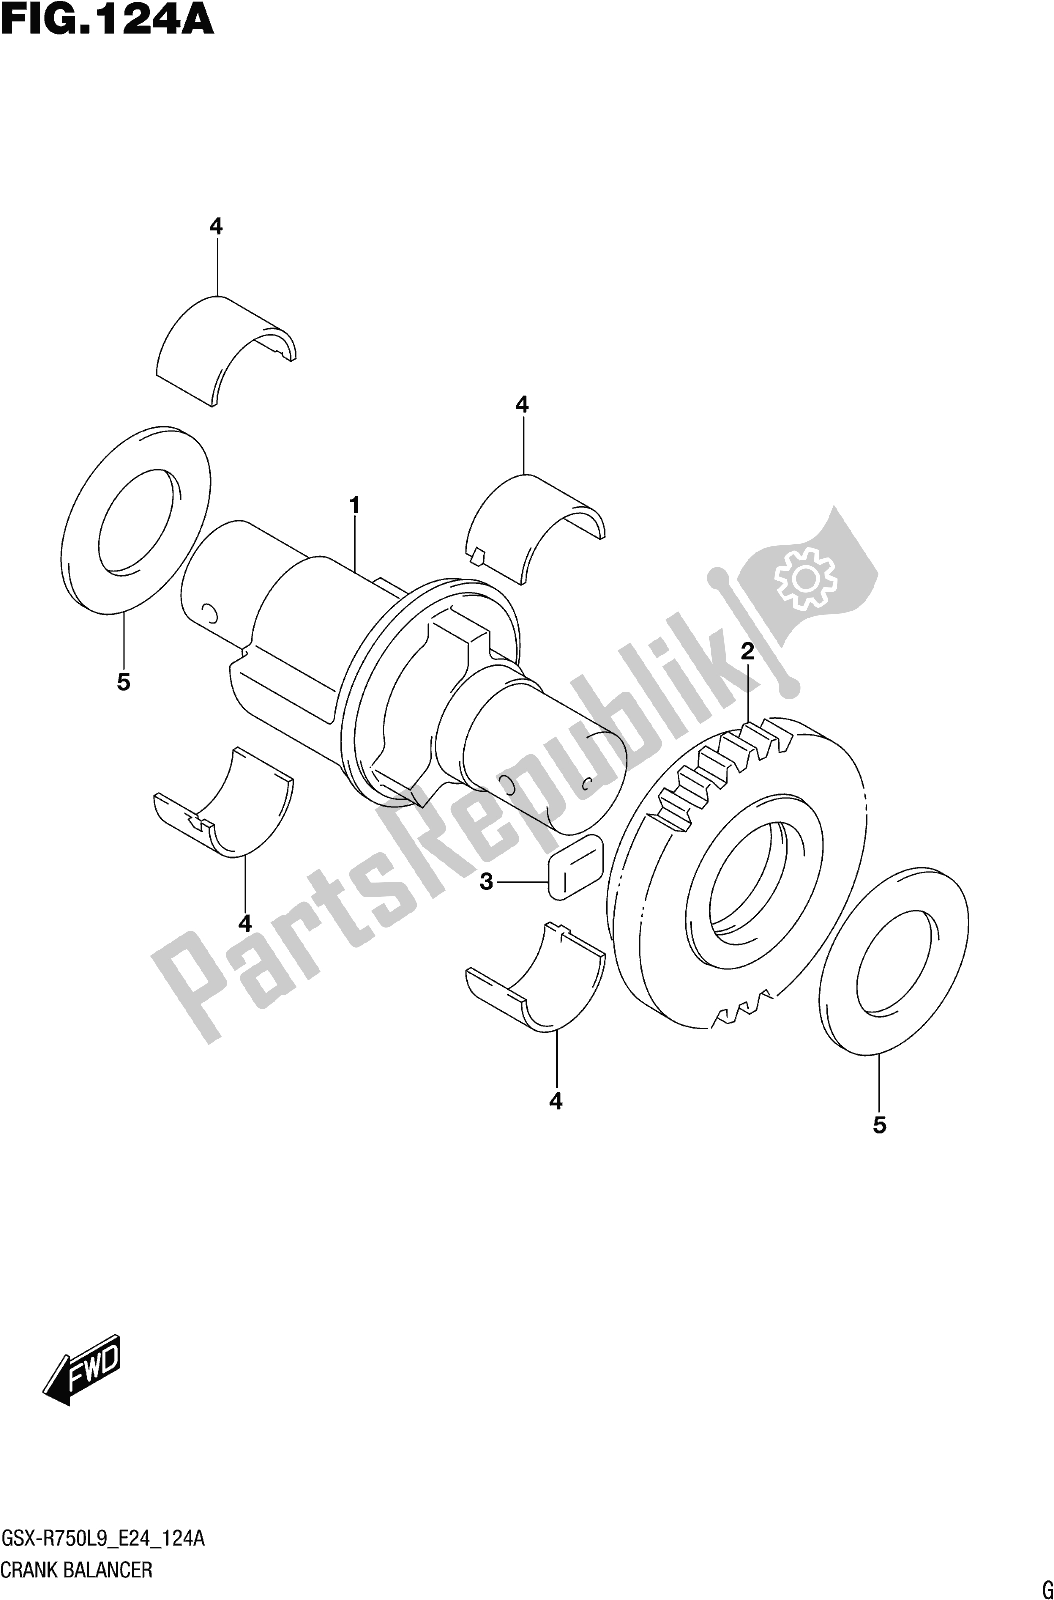 All parts for the Fig. 124a Crank Balancer of the Suzuki Gsx-r 750 2019